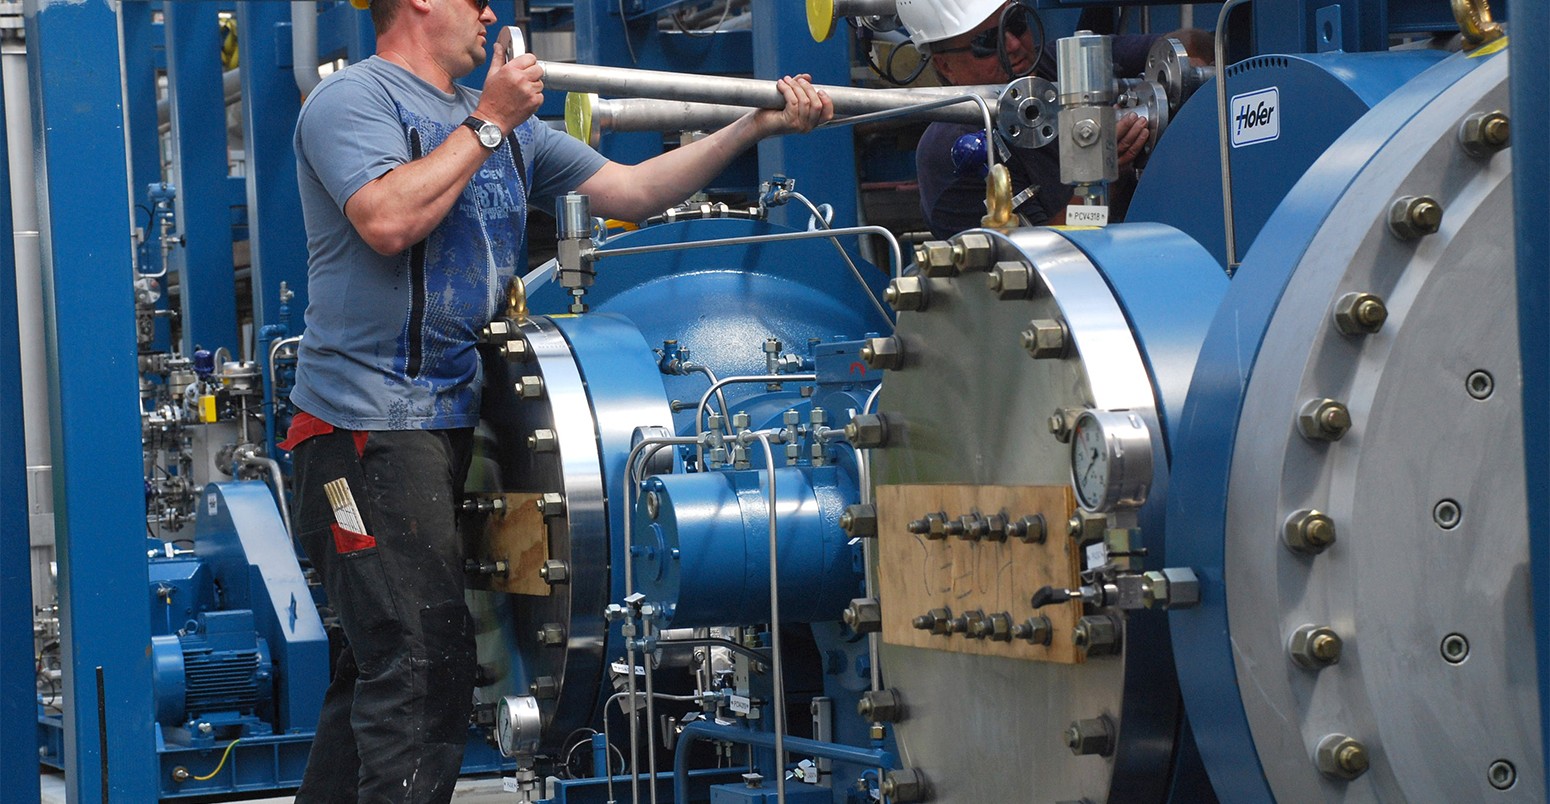 A mechanic at work installing new filters as part of a carbon capture pilot project (CCS) in Spremberg, Germany